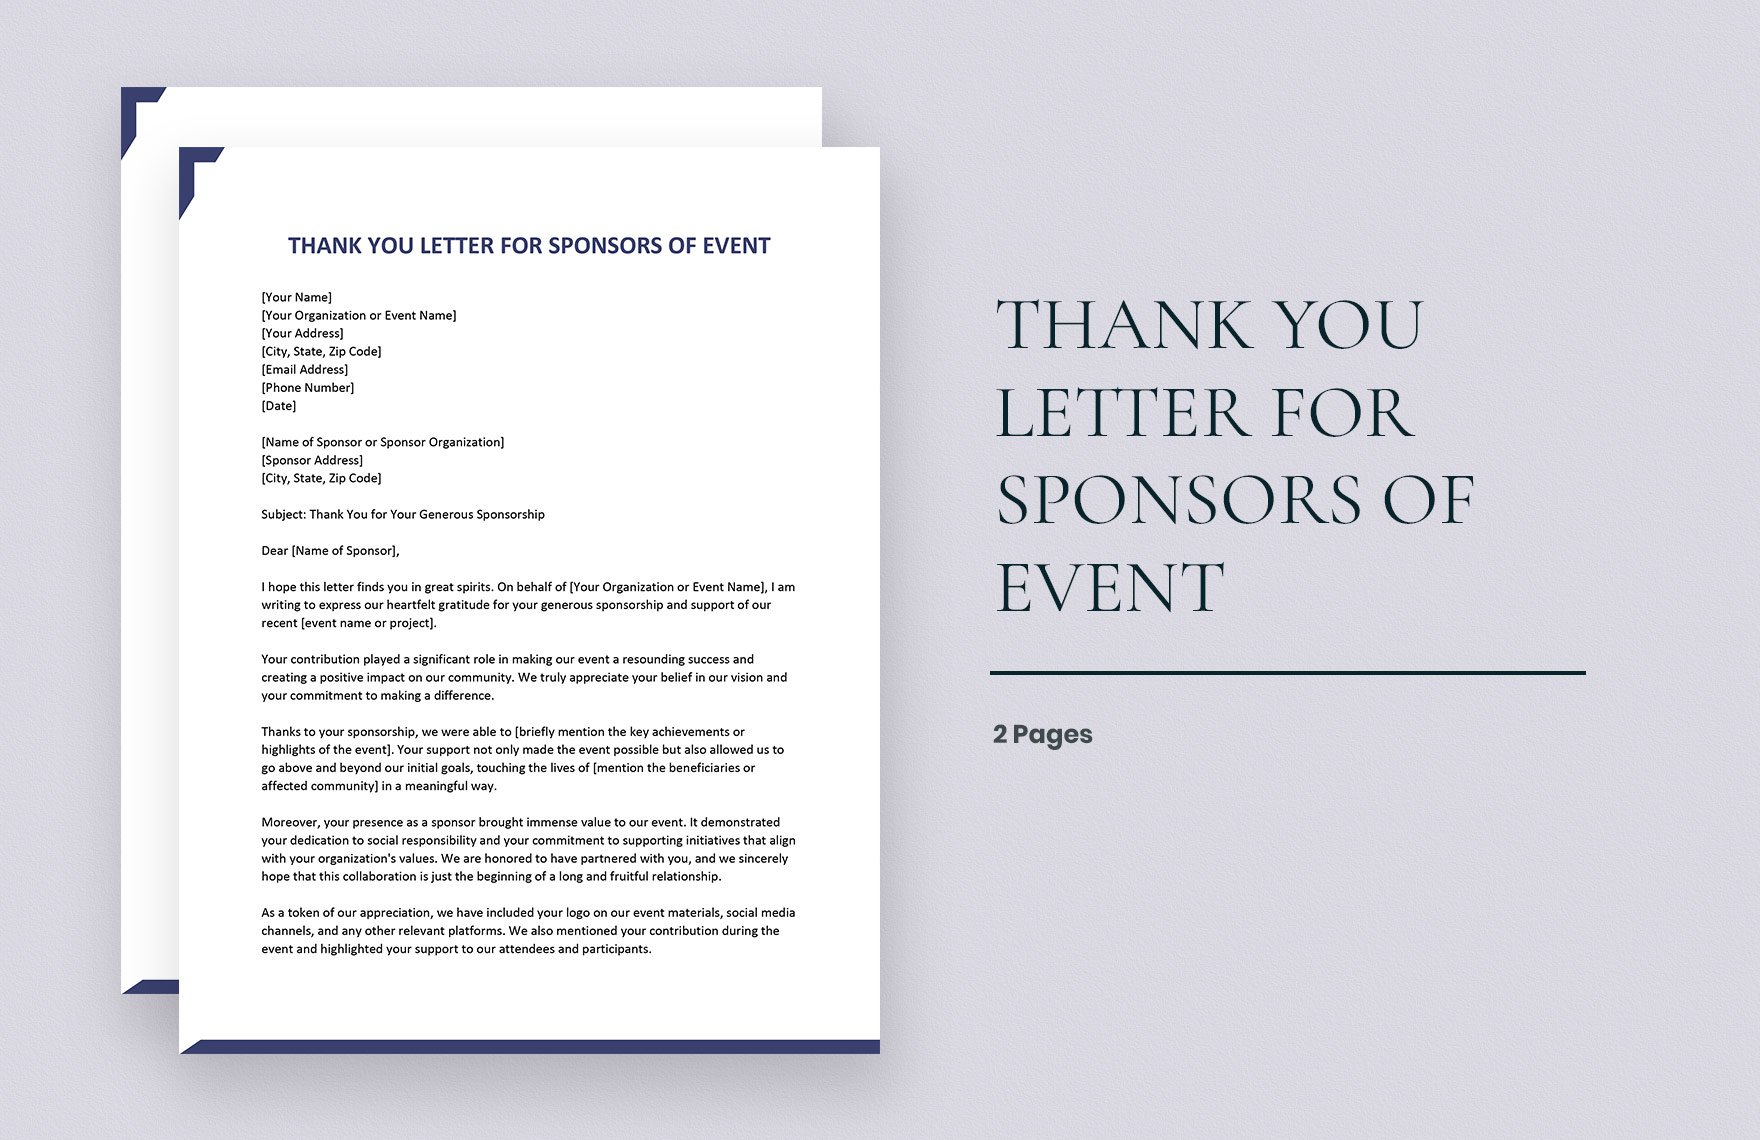 Free Thank You Letter for Sponsors of Event